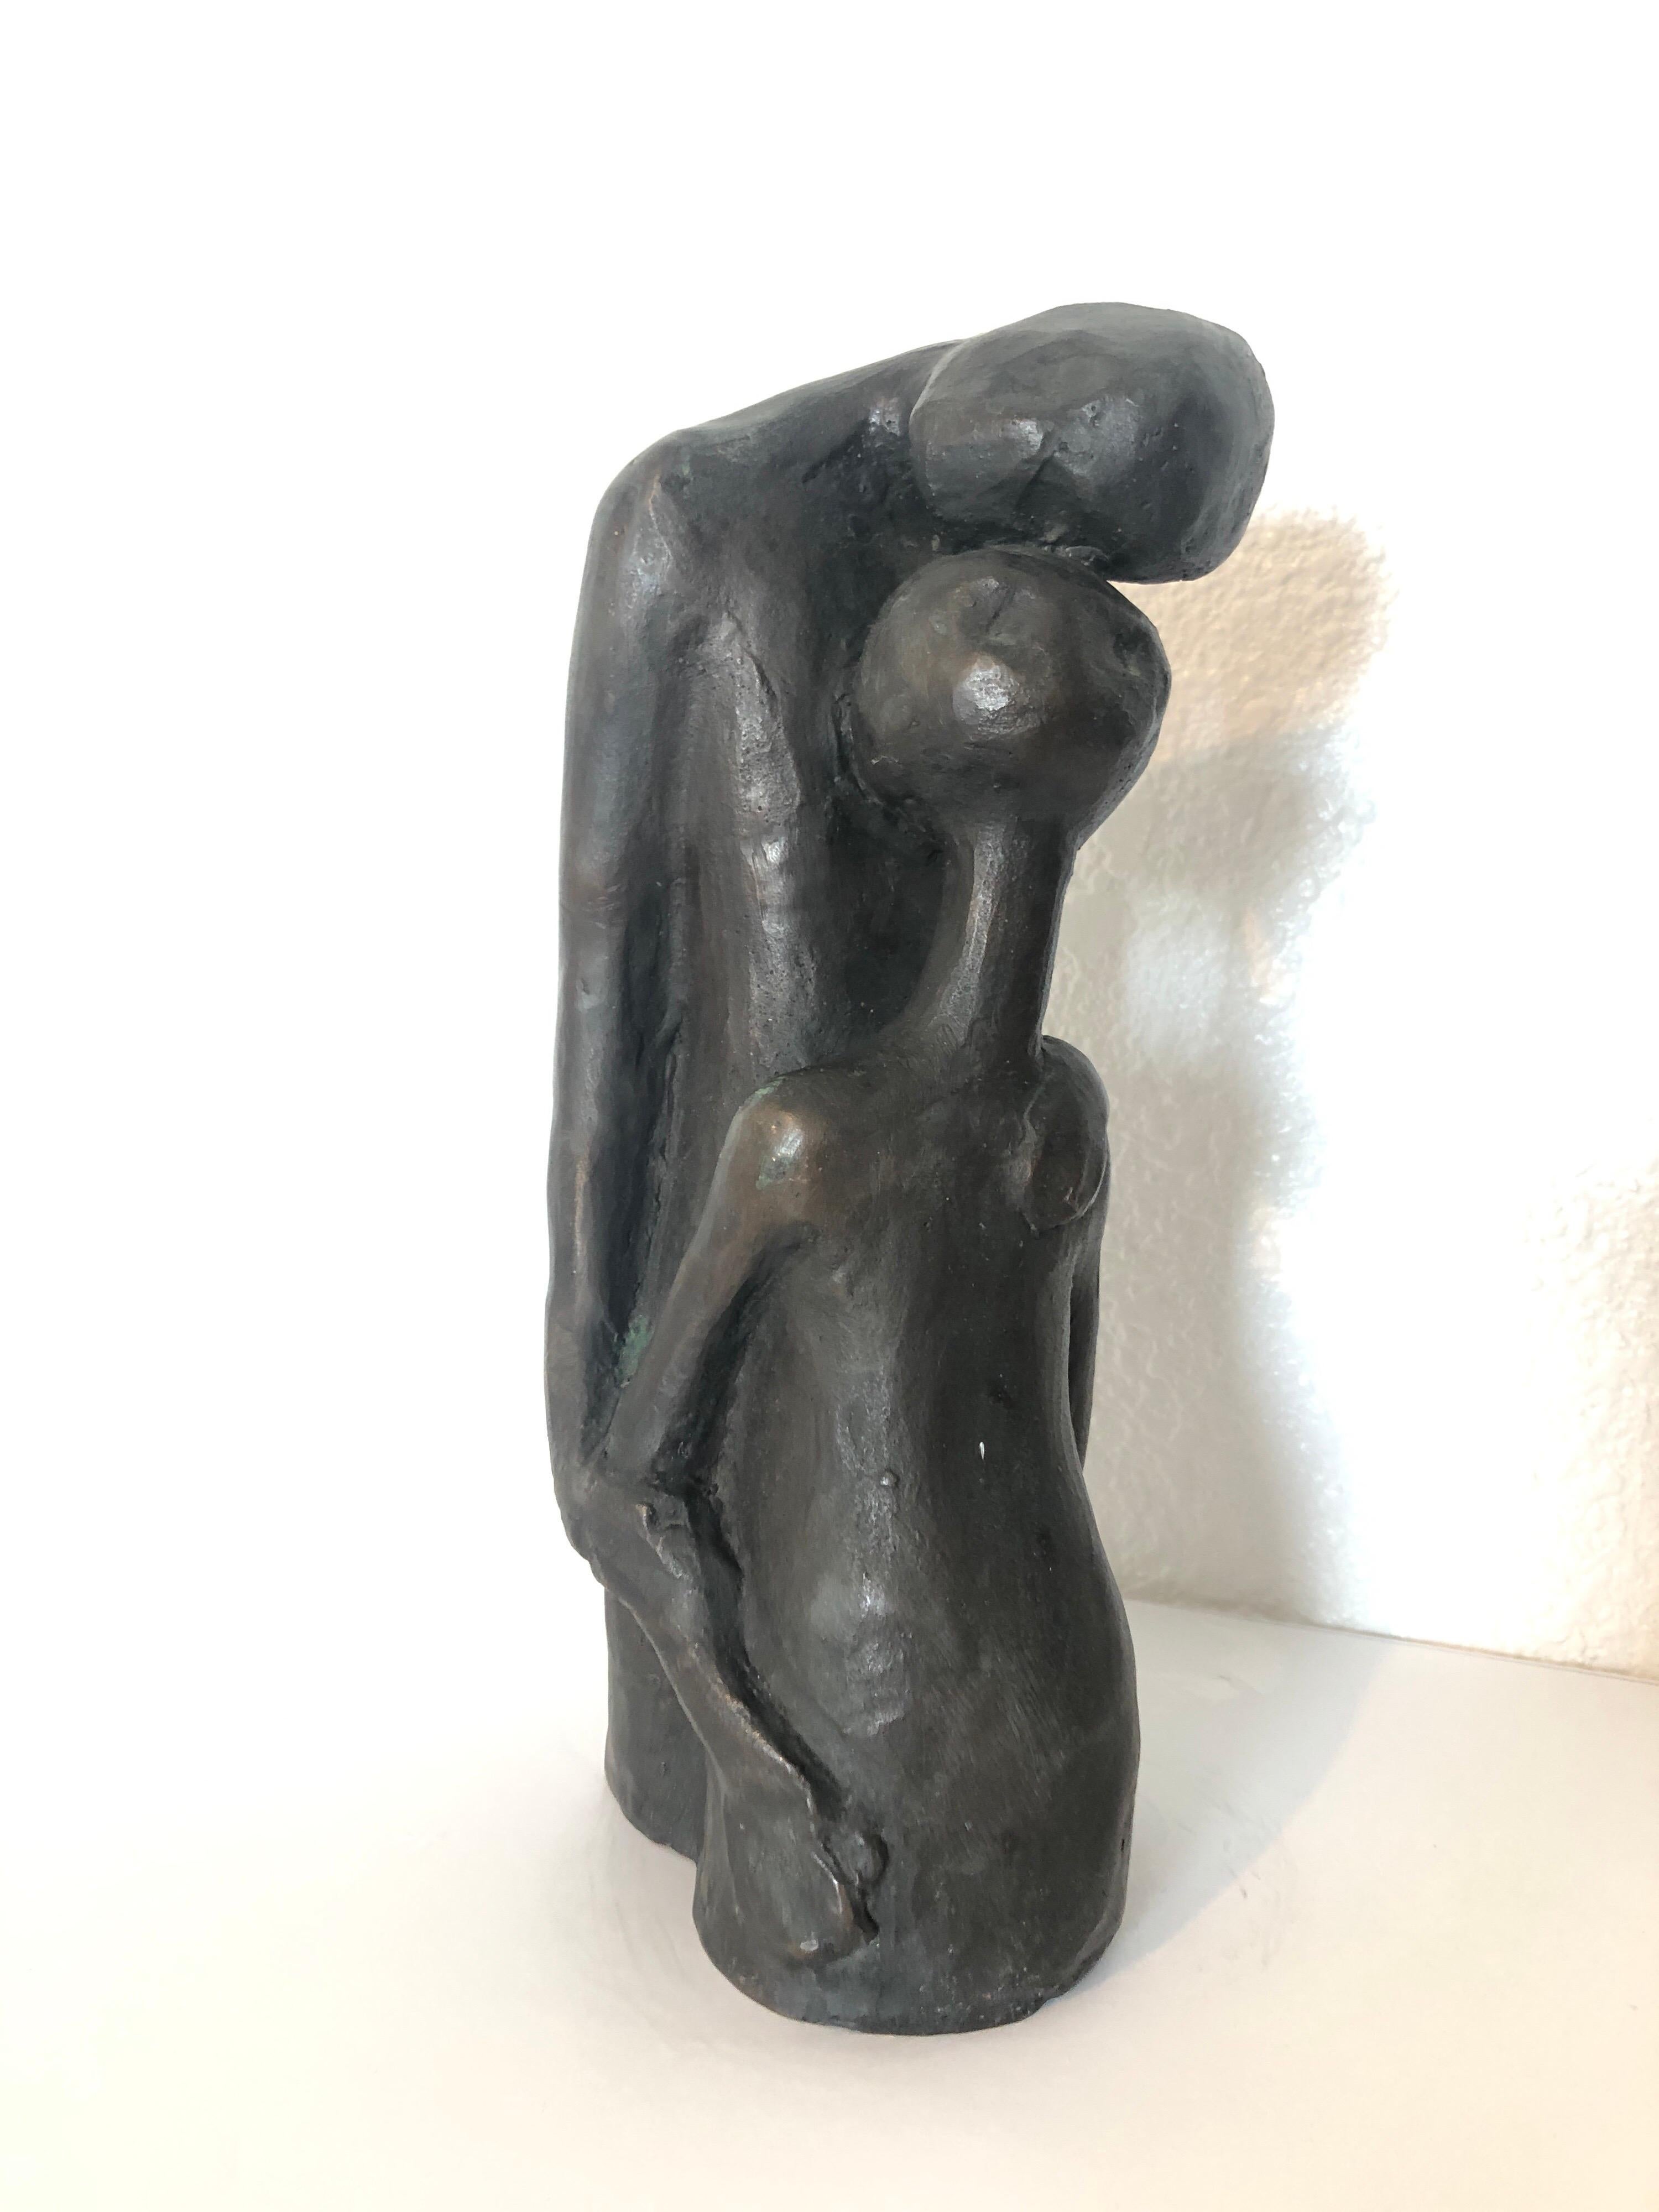 Original Bronze sculpture by German Israeli artist Noemi Schindler. Signed with her initials in Hebrew. Minimalist grace, elegance and proportion. 

Noemi Schindler was born in Berlin, Germany in 1919 a daughter to Hugo Levi who was a silk merchant